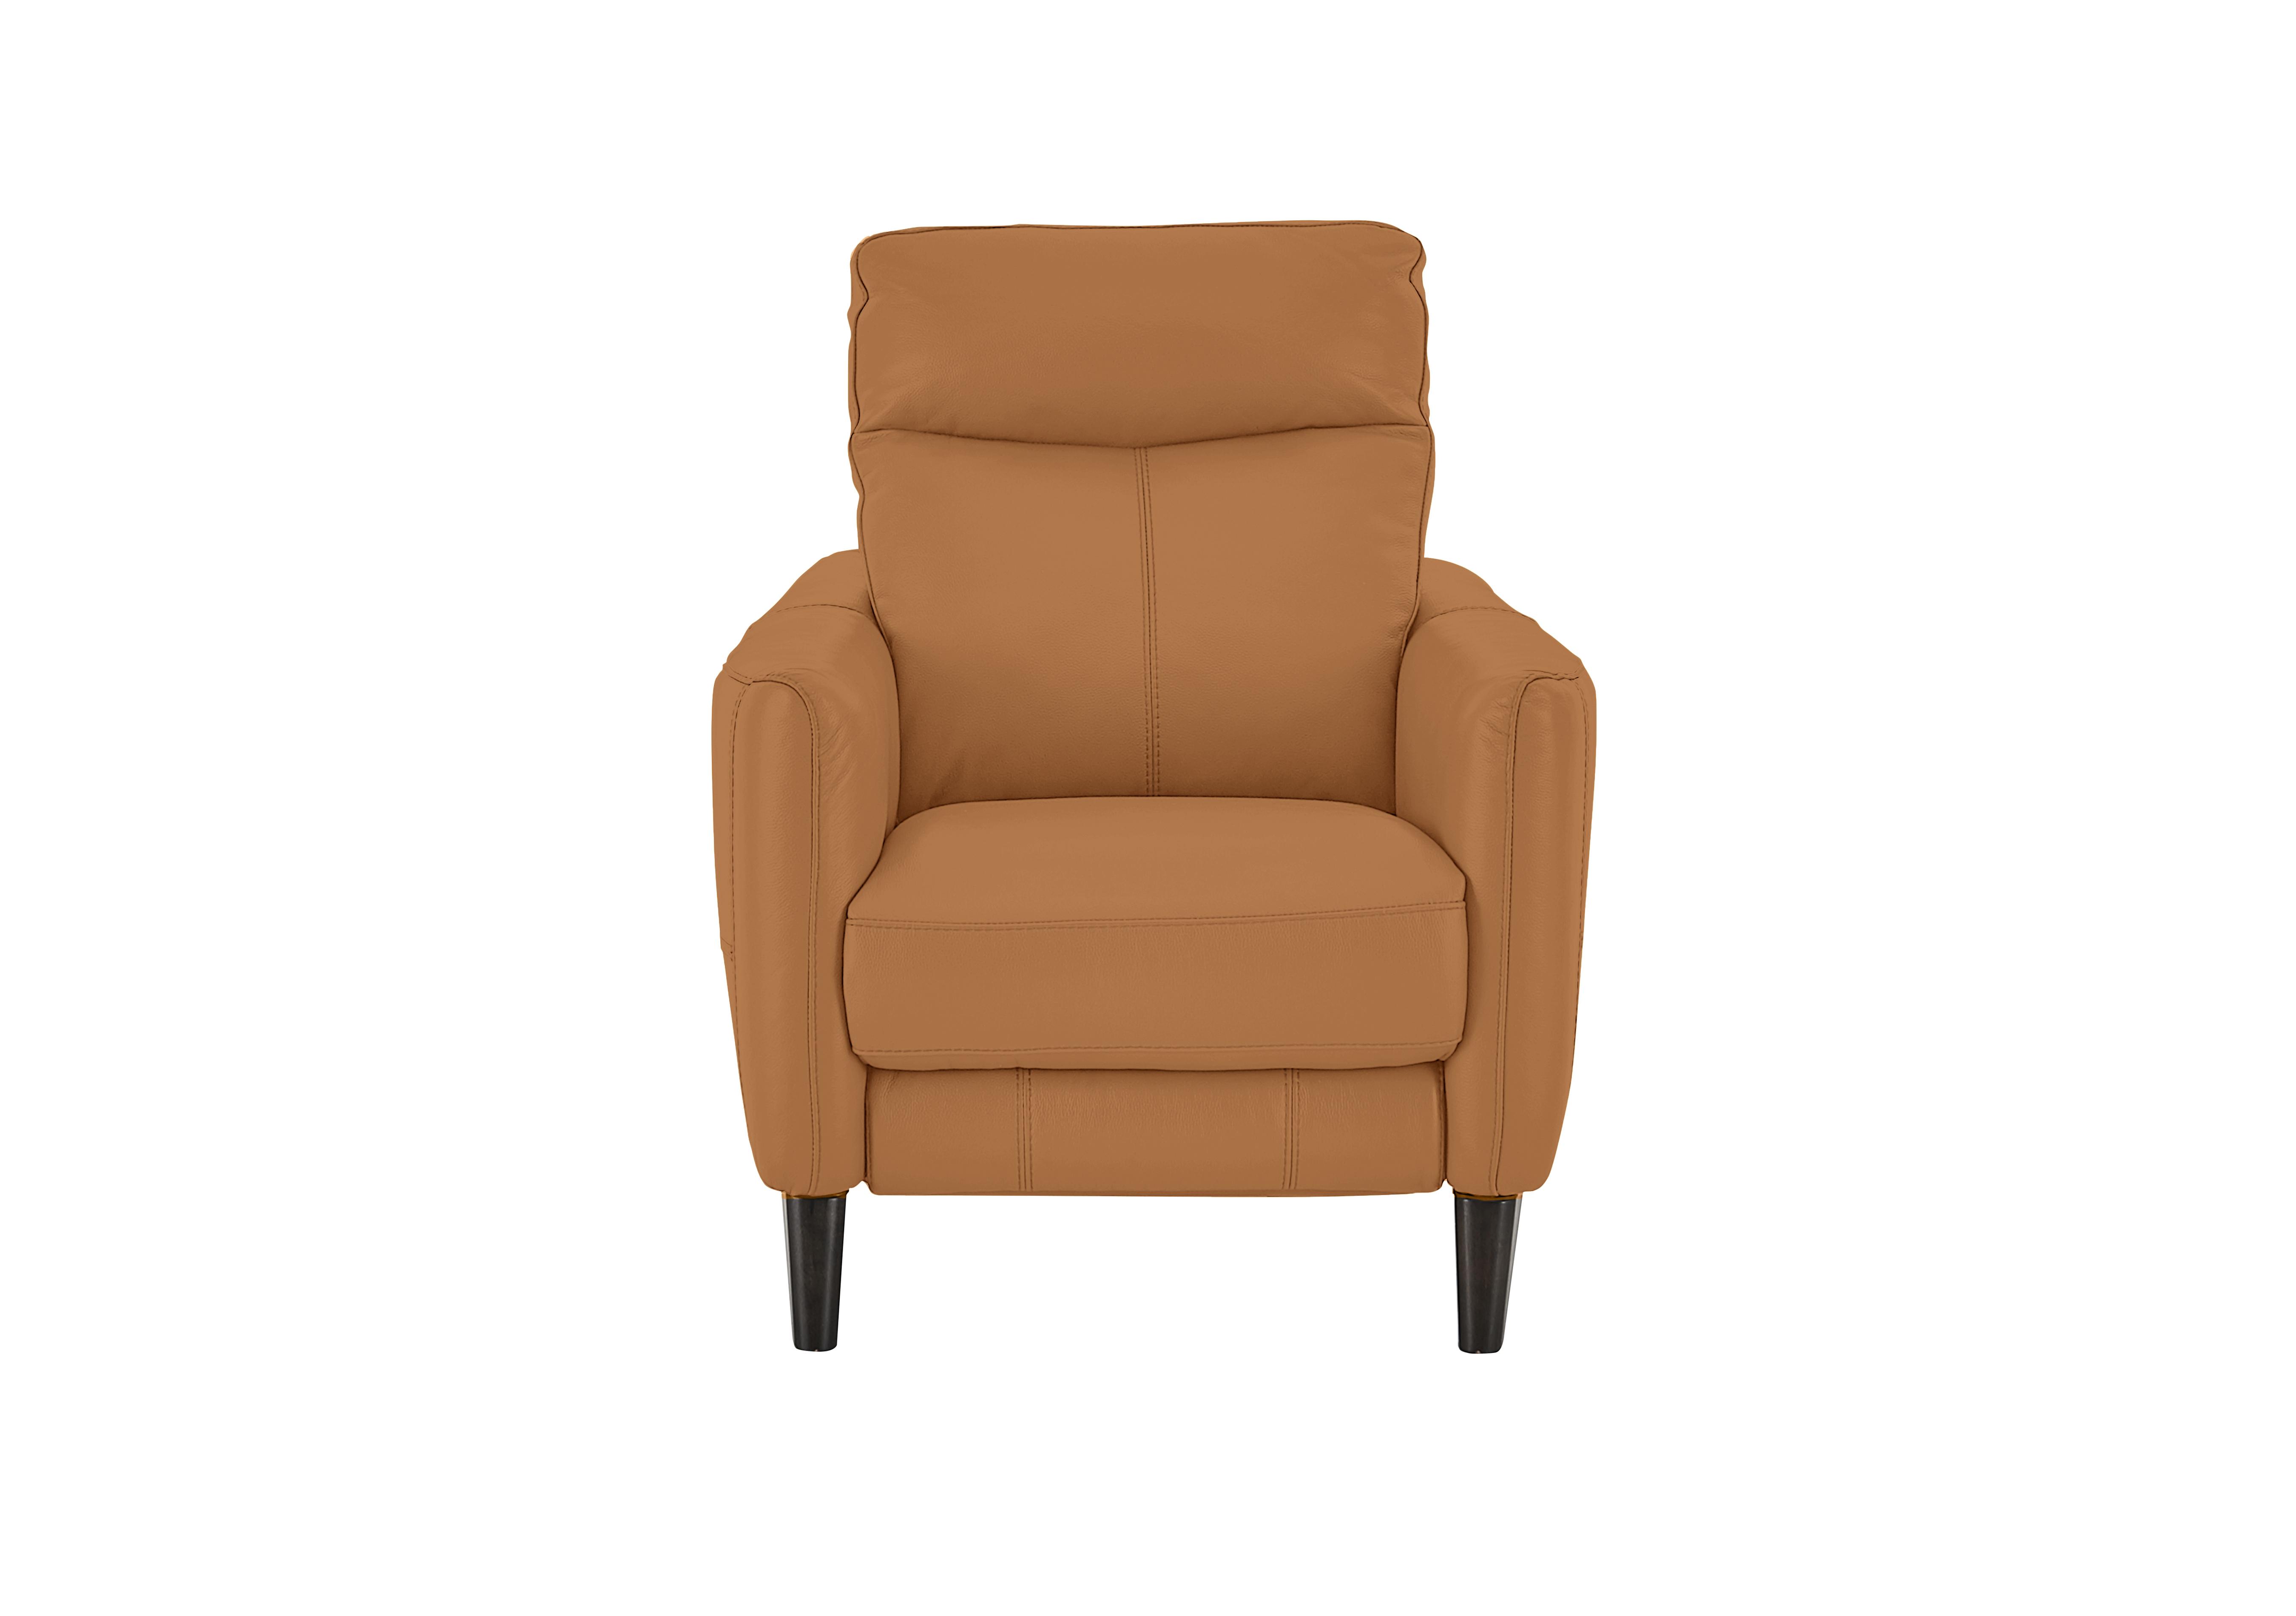 Compact Collection Petit Leather Recliner Armchair in Bv-335e Honey Yellow on Furniture Village